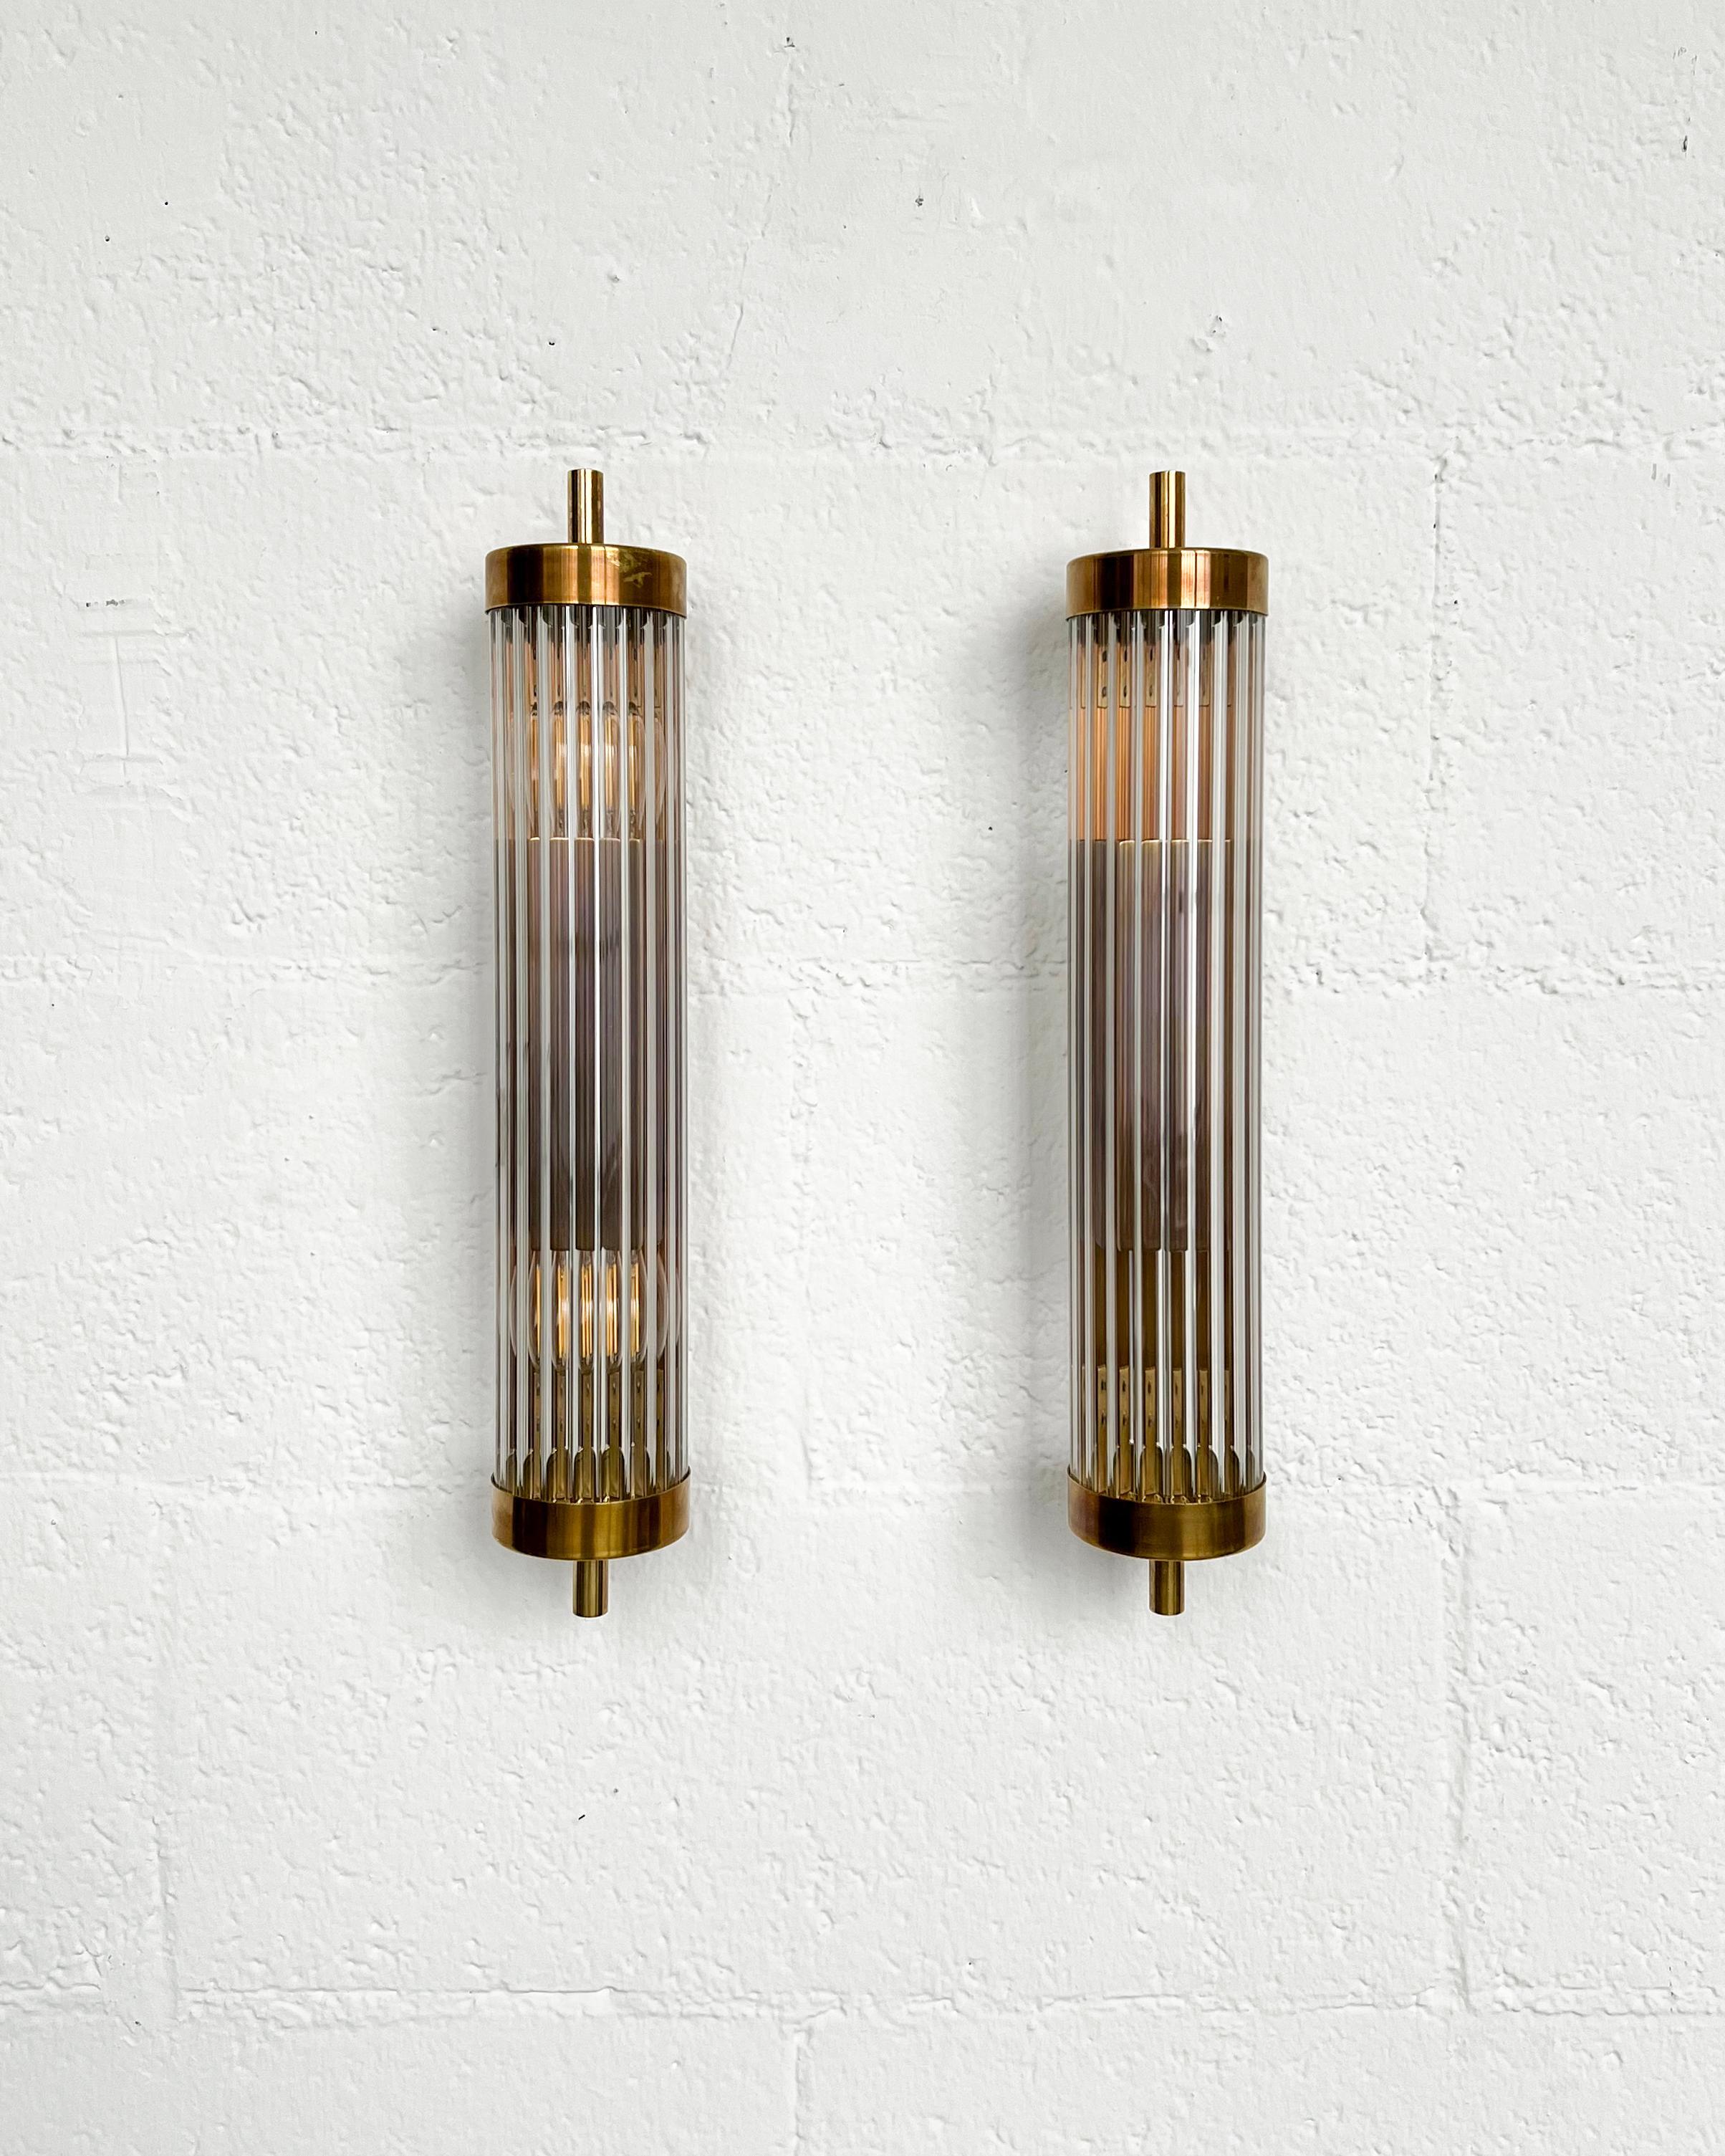 Art Deco Wall Lamp Appliques in Brass and Glass , Wall Sconces 1930's - 1960's For Sale 8